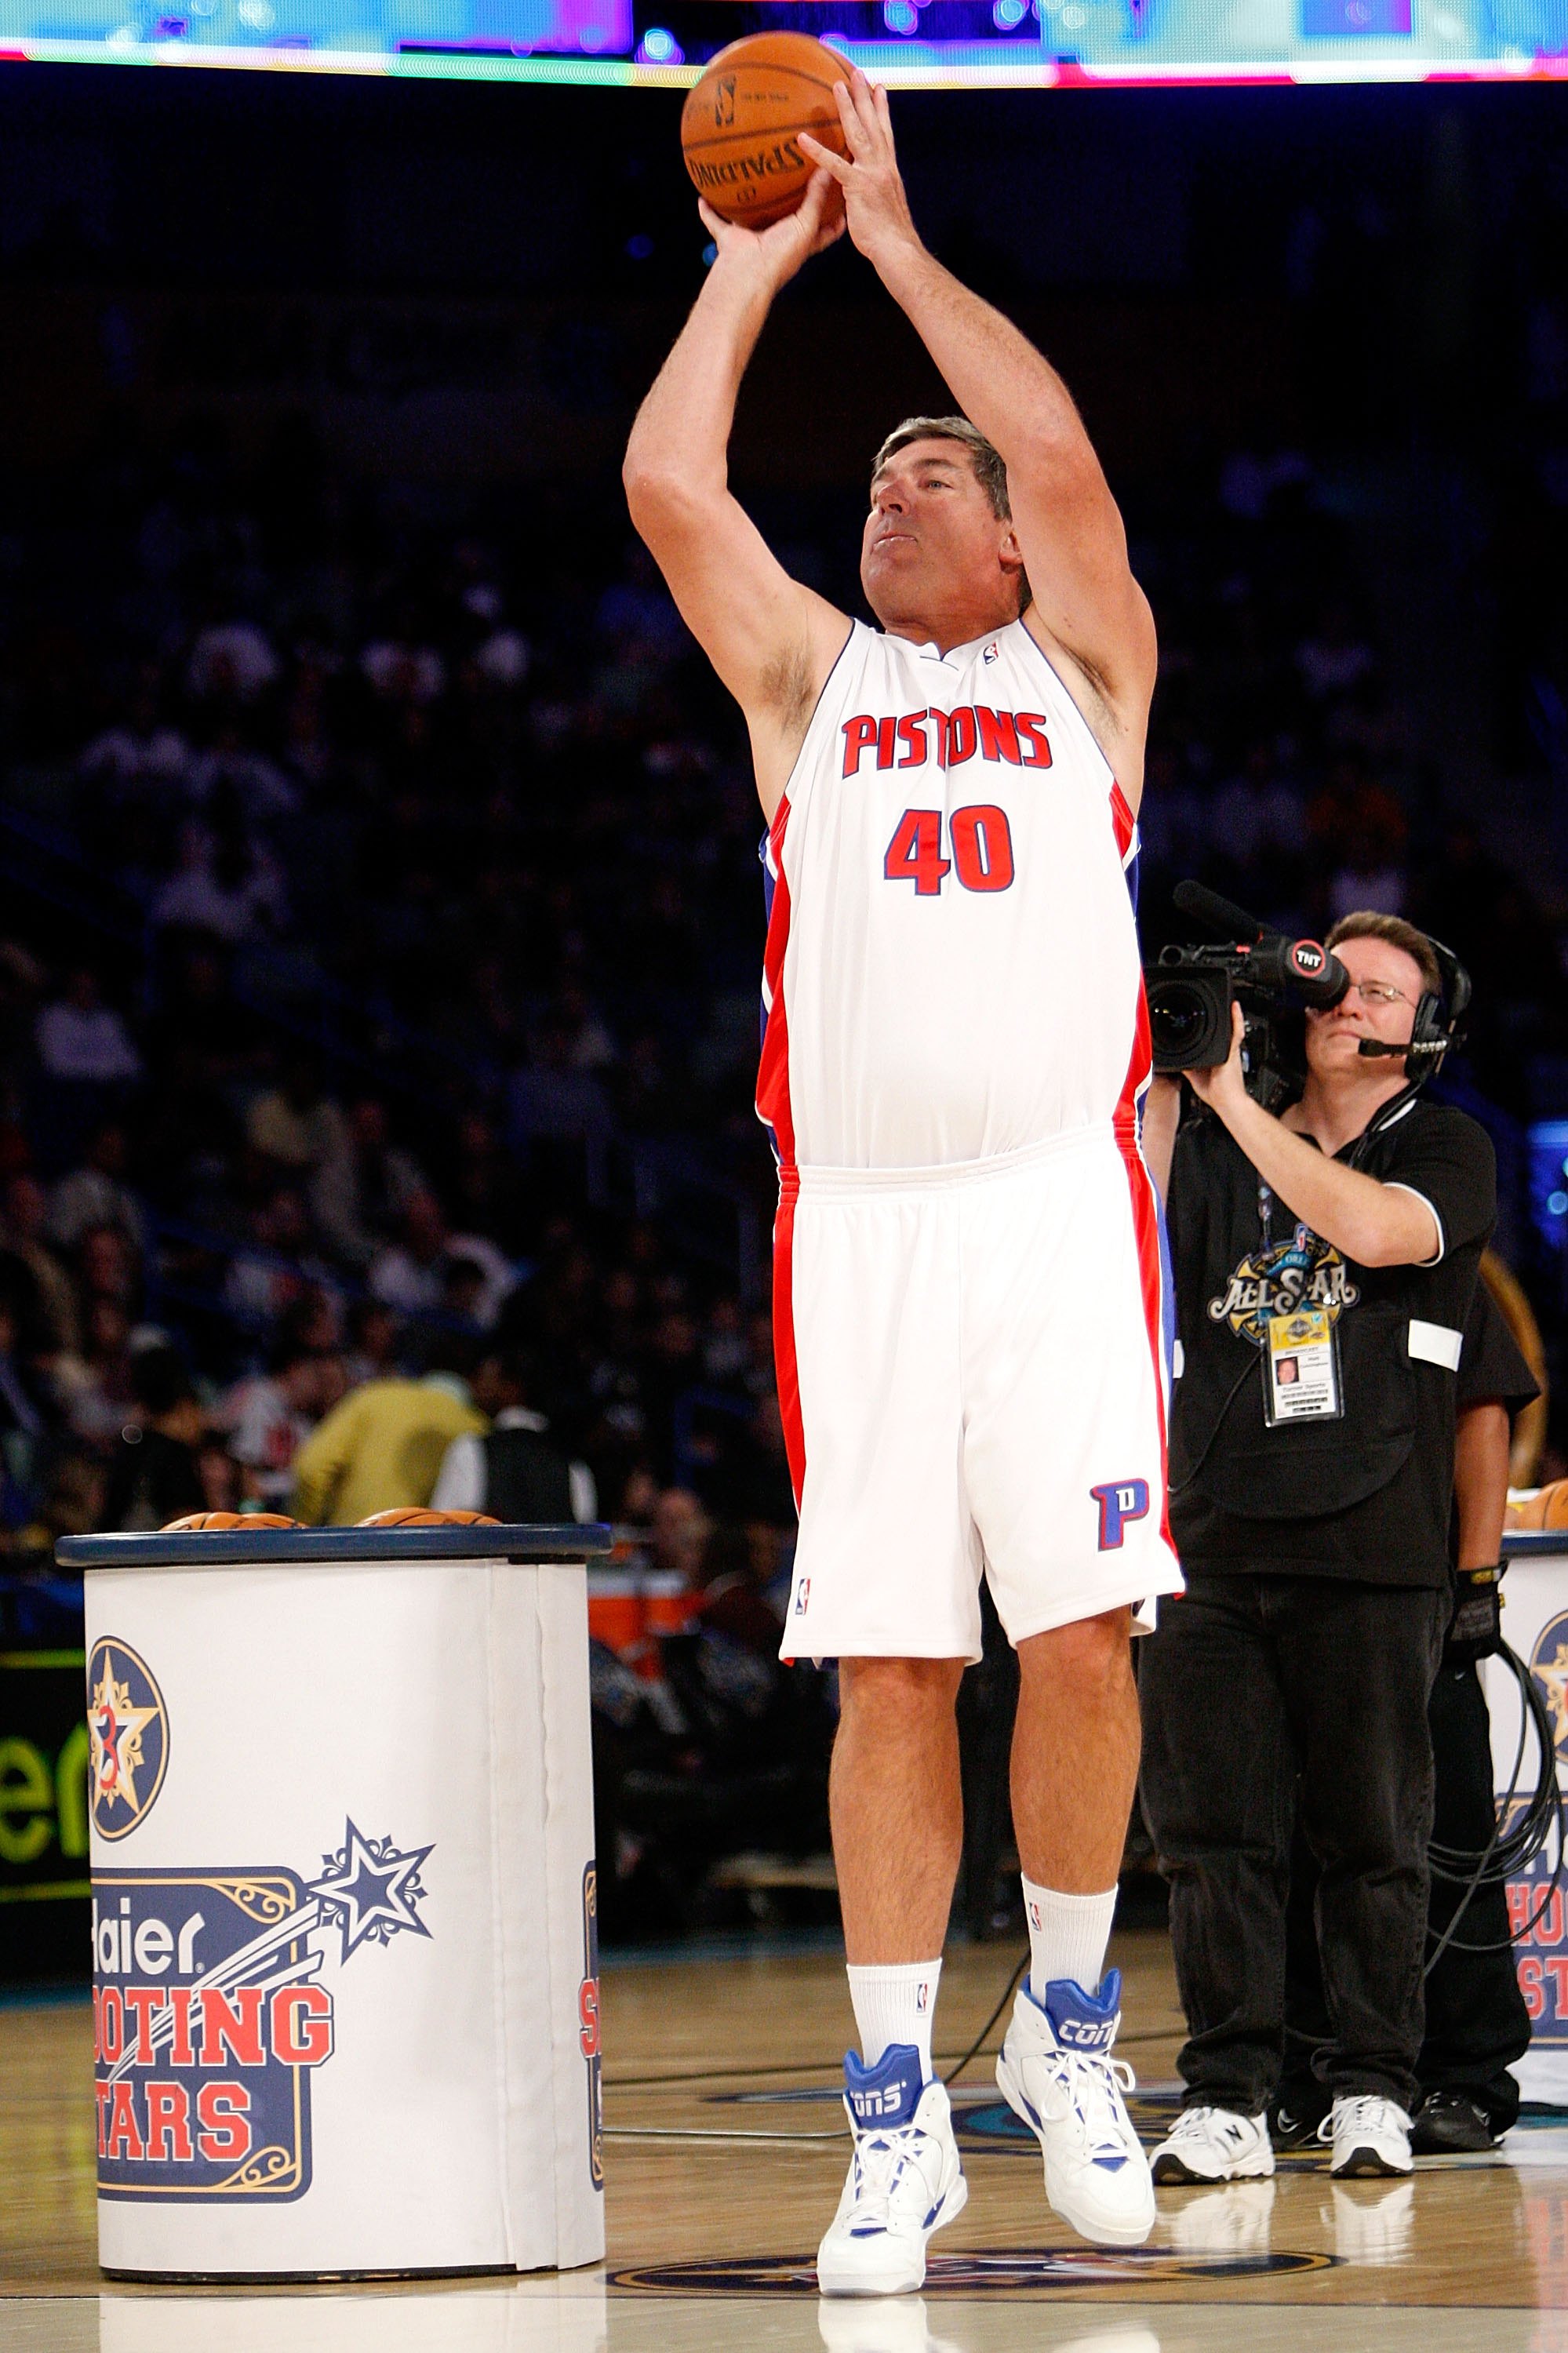 NEW ORLEANS - FEBRUARY 16:  NBA legend Bill Laimbeer participates in the Haier Shooting Stars competition, part of 2008 NBA All-Star Weekend at the New Orleans Arena on February 16, 2008 in New Orleans, Louisiana.  NOTE TO USER: User expressly acknowledge